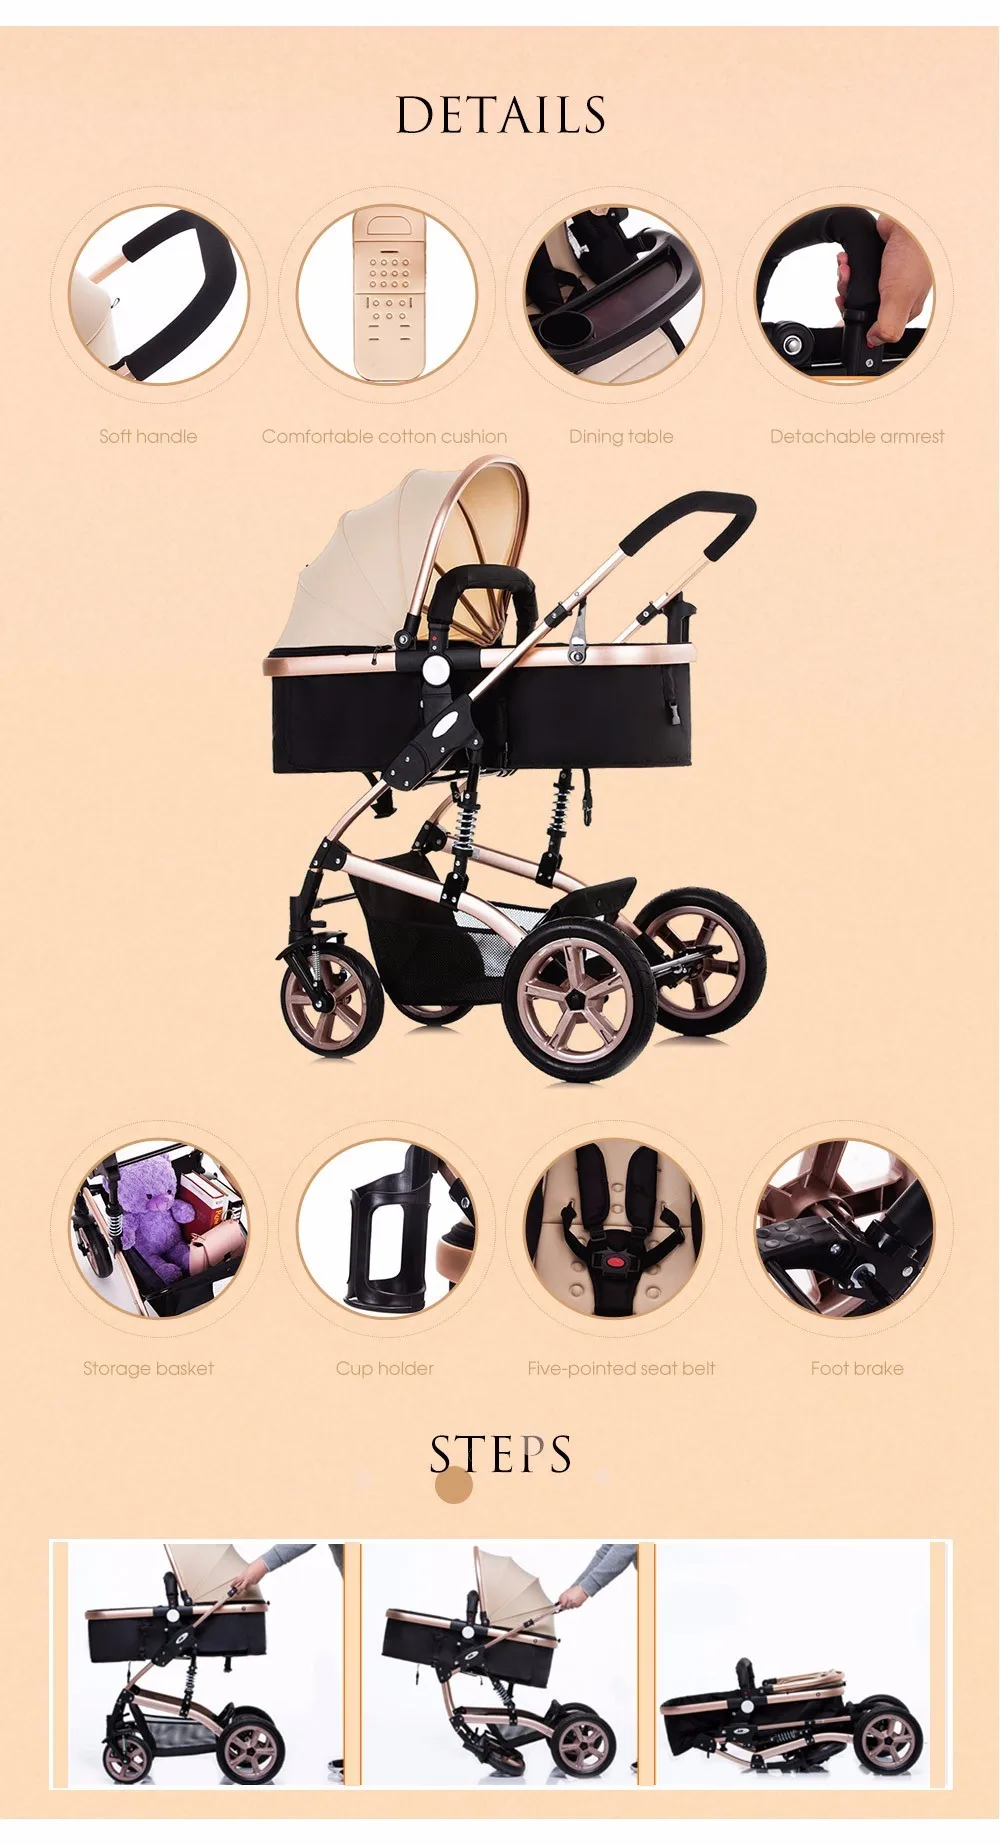 NEW Foldable Pram Baby Stroller With Explosion-Proof Rear Wheel Lightweight Aluminum Alloy Luxury Baby Stroller